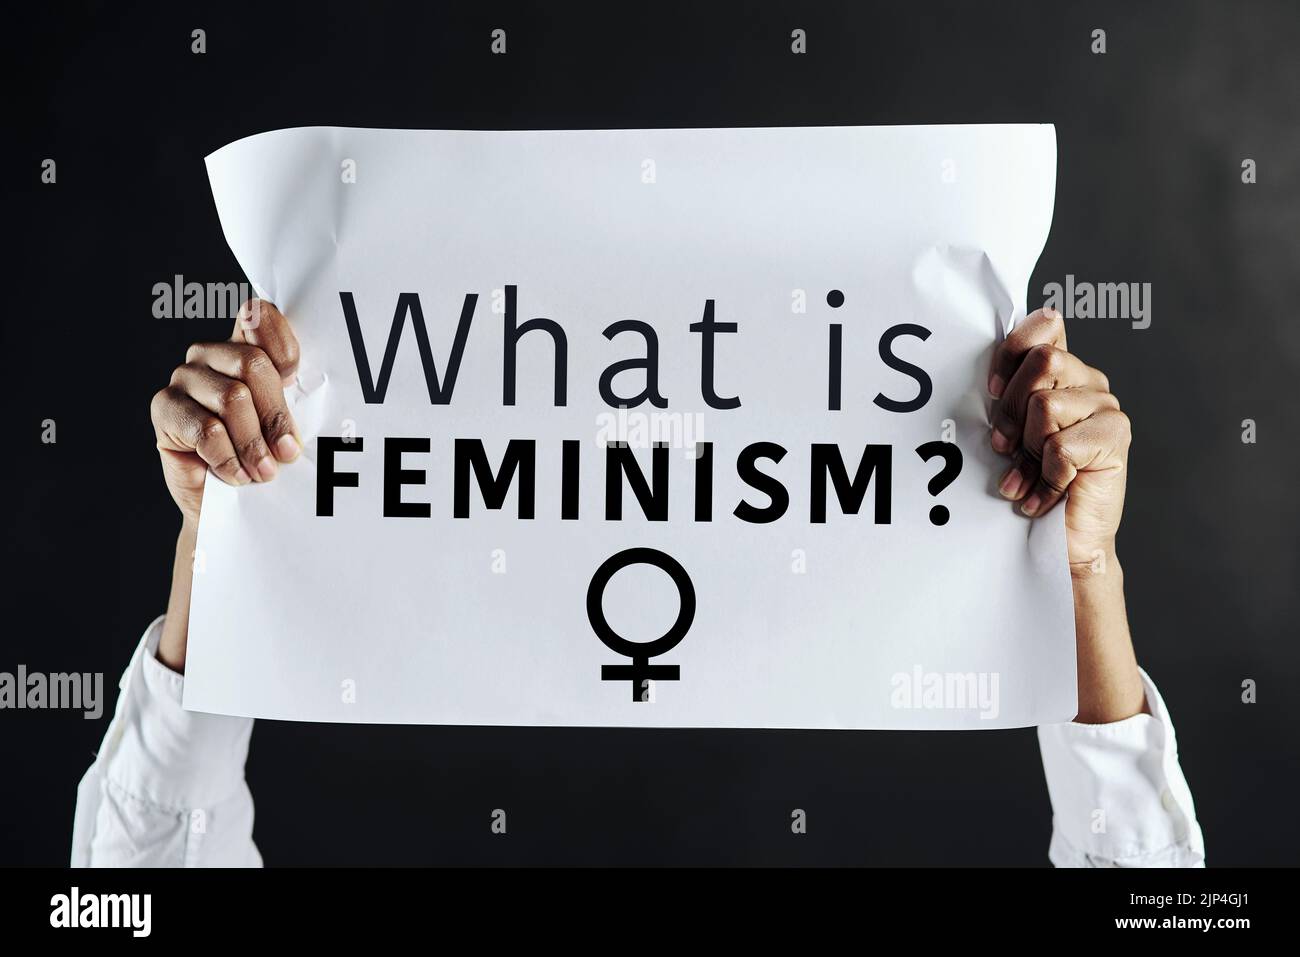 The question on everybodys lips. Studio shot of an unrecognisable woman holding up a sign with the words What is feminism on it. Stock Photo